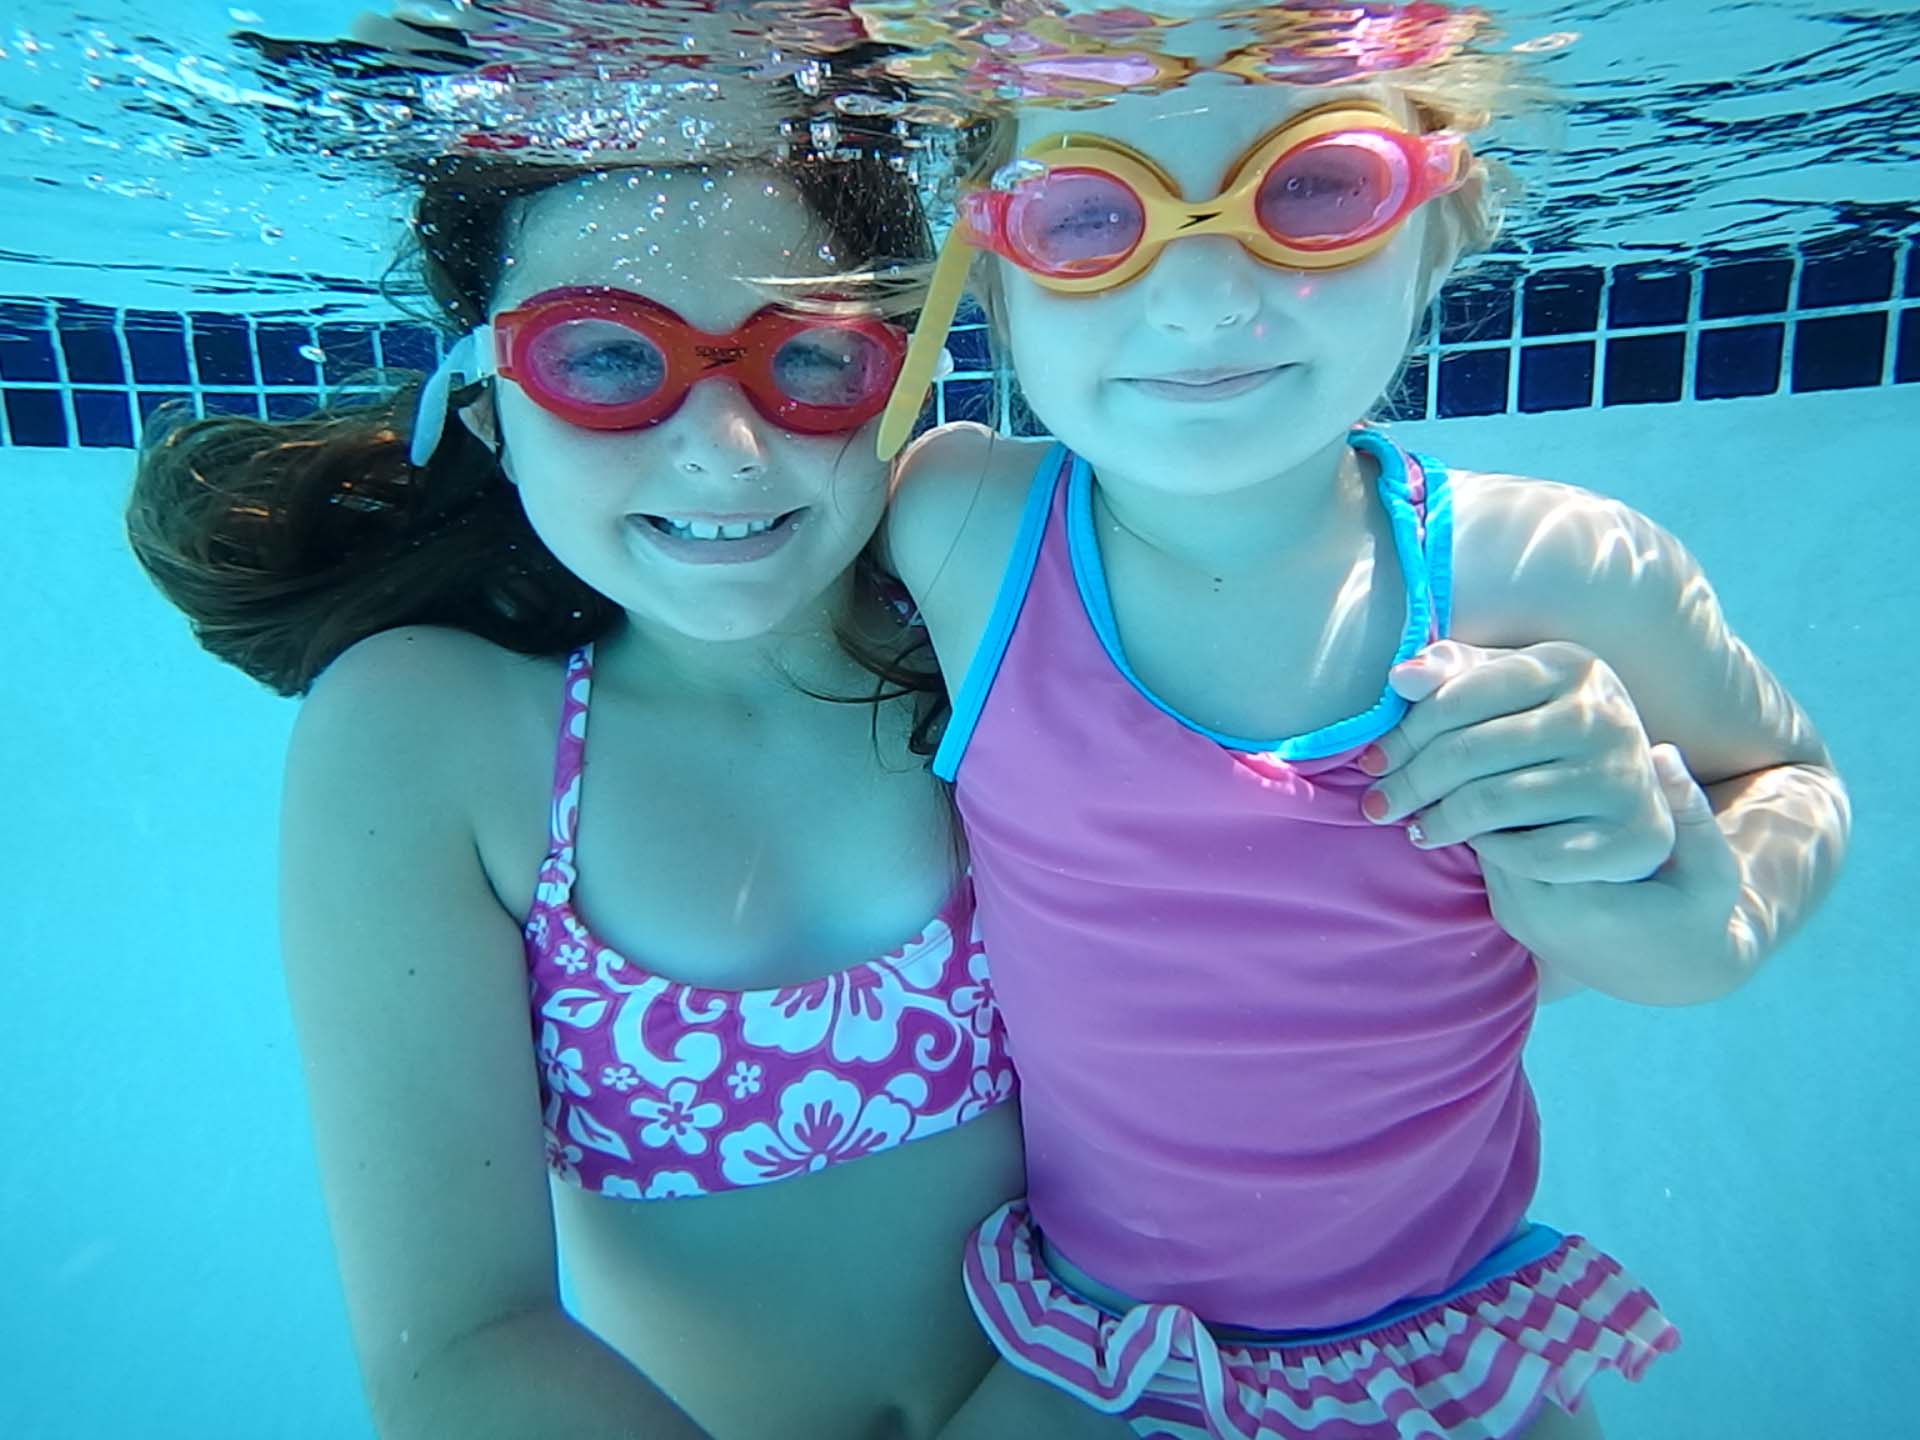 Two joyful young girls, aged 6 and 3, gleefully swimming underwater